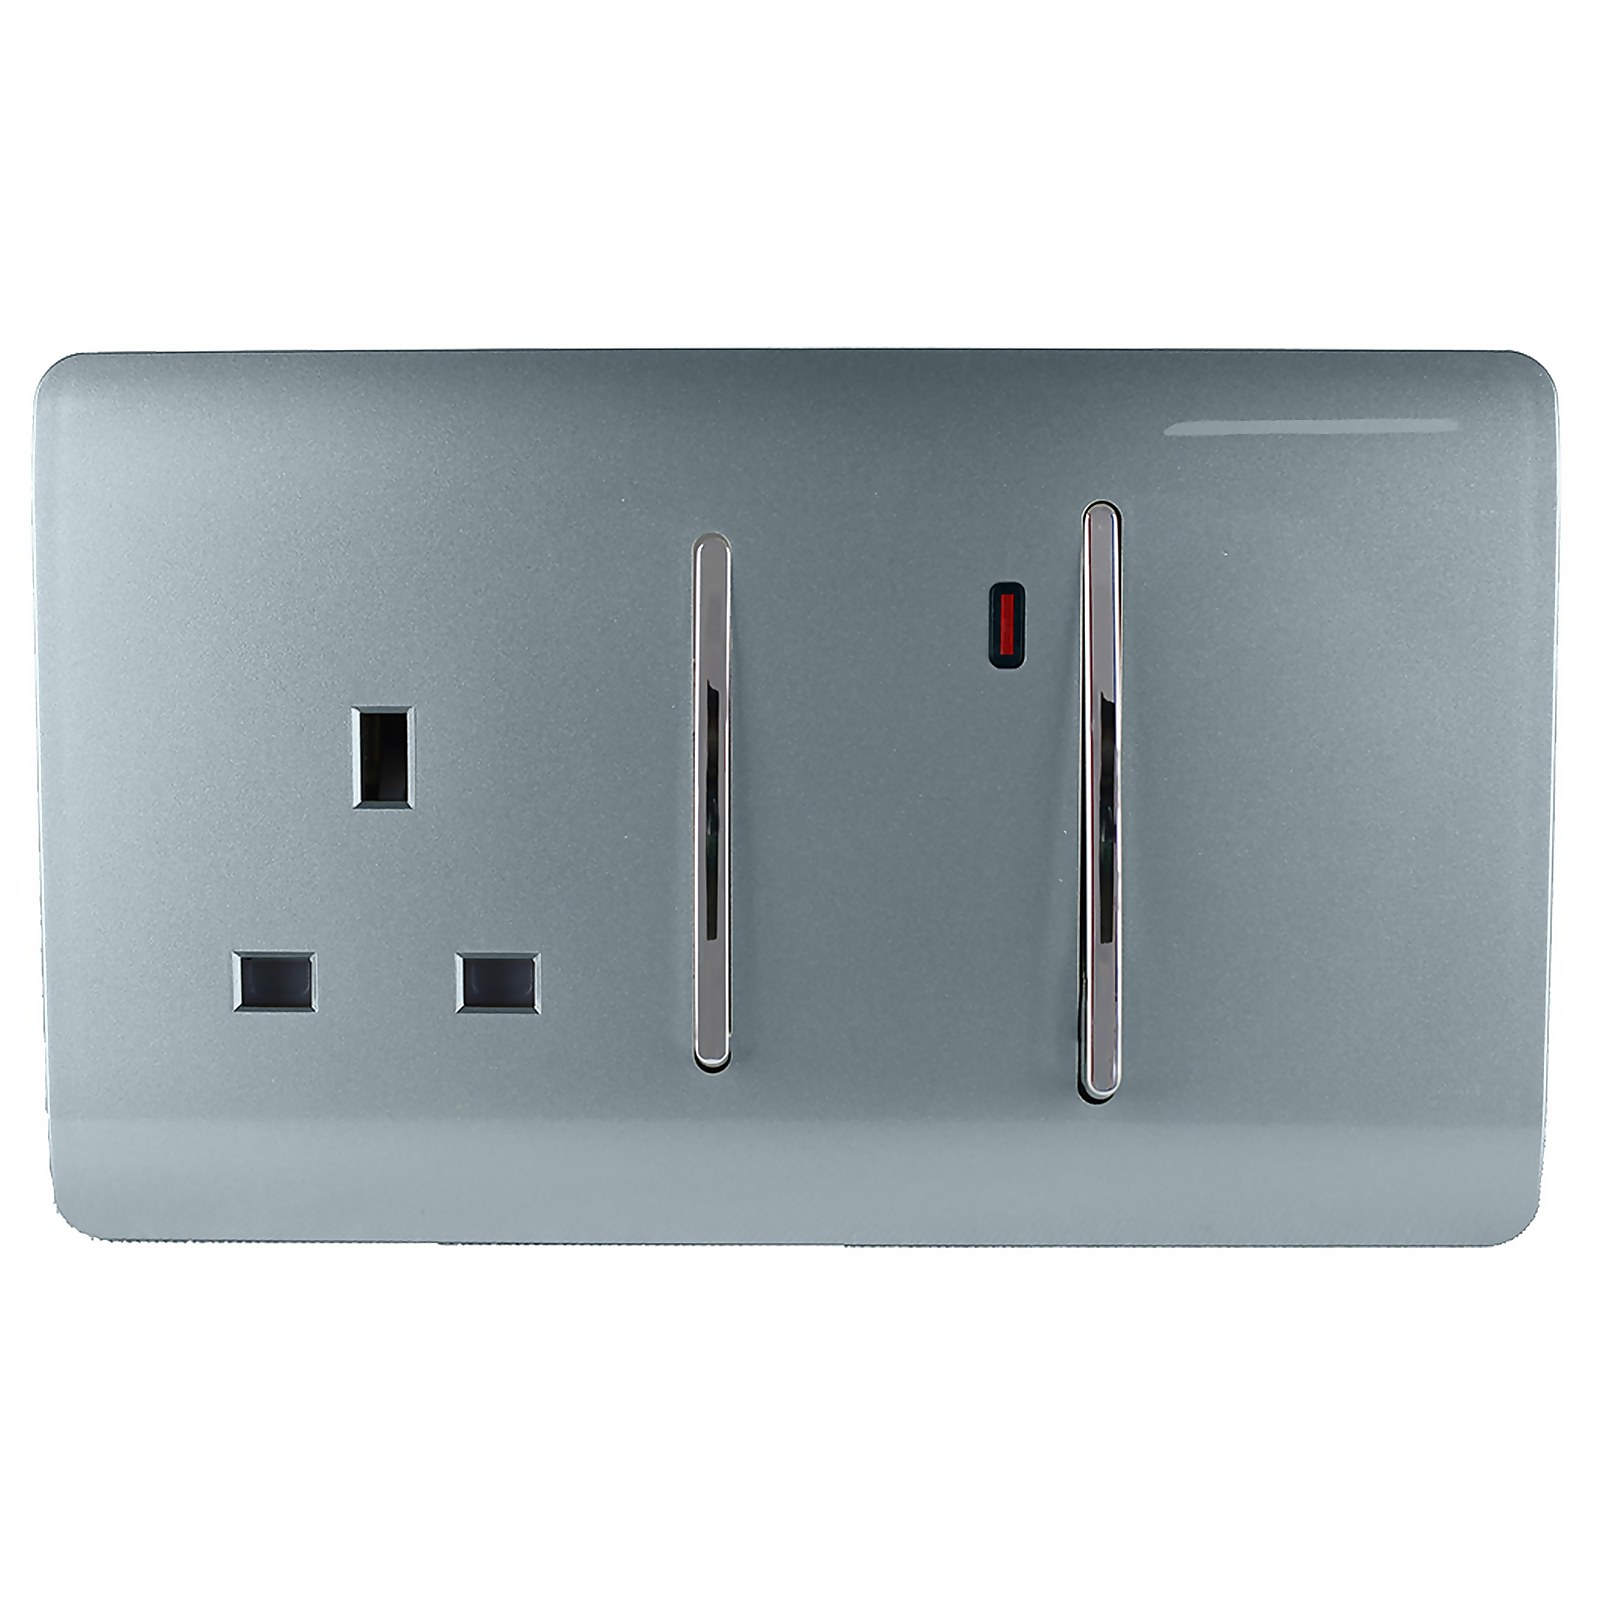 Photo of Trendi Switch 45amp Cooker Switch And Socket In Cool Grey